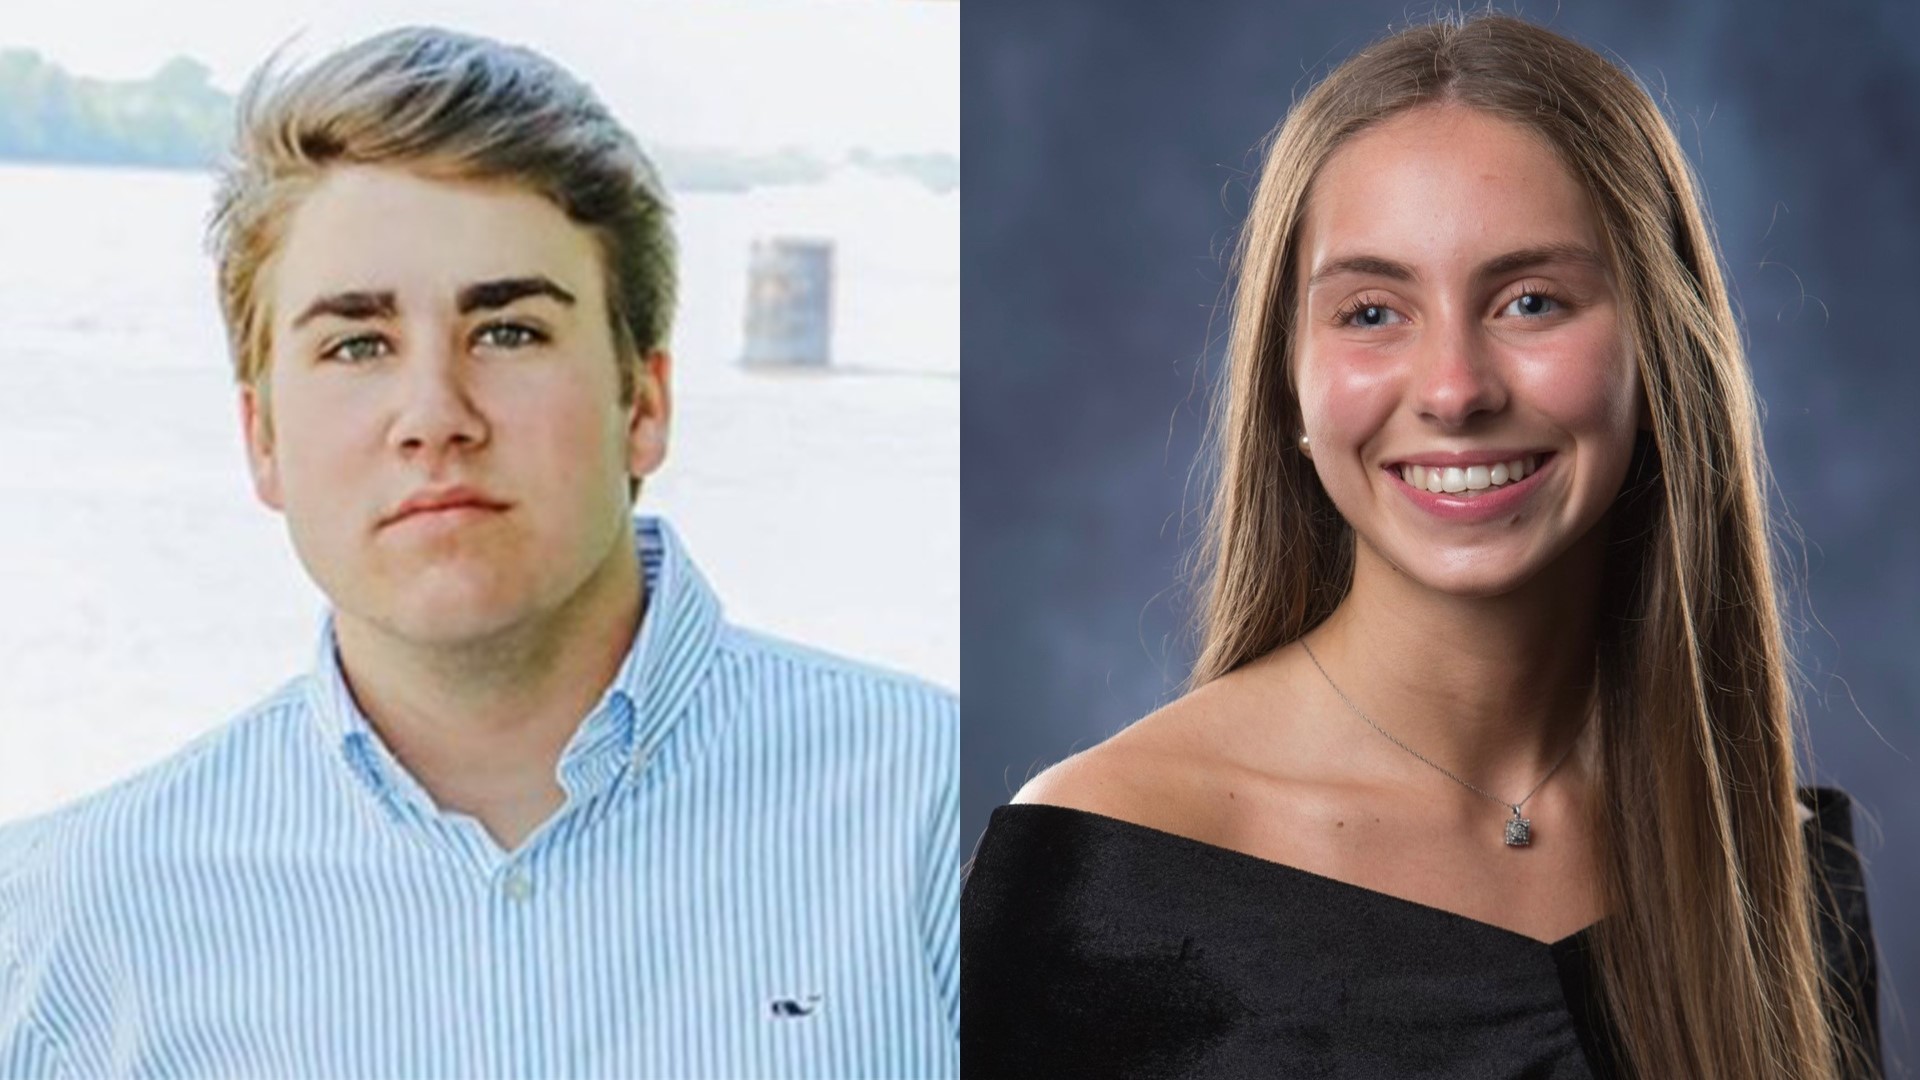 The two laws will increase the penalties for hazing and DUI in Kentucky. It comes after the 2021 deaths of Lofton Hazelwood and Lily Fairfield.